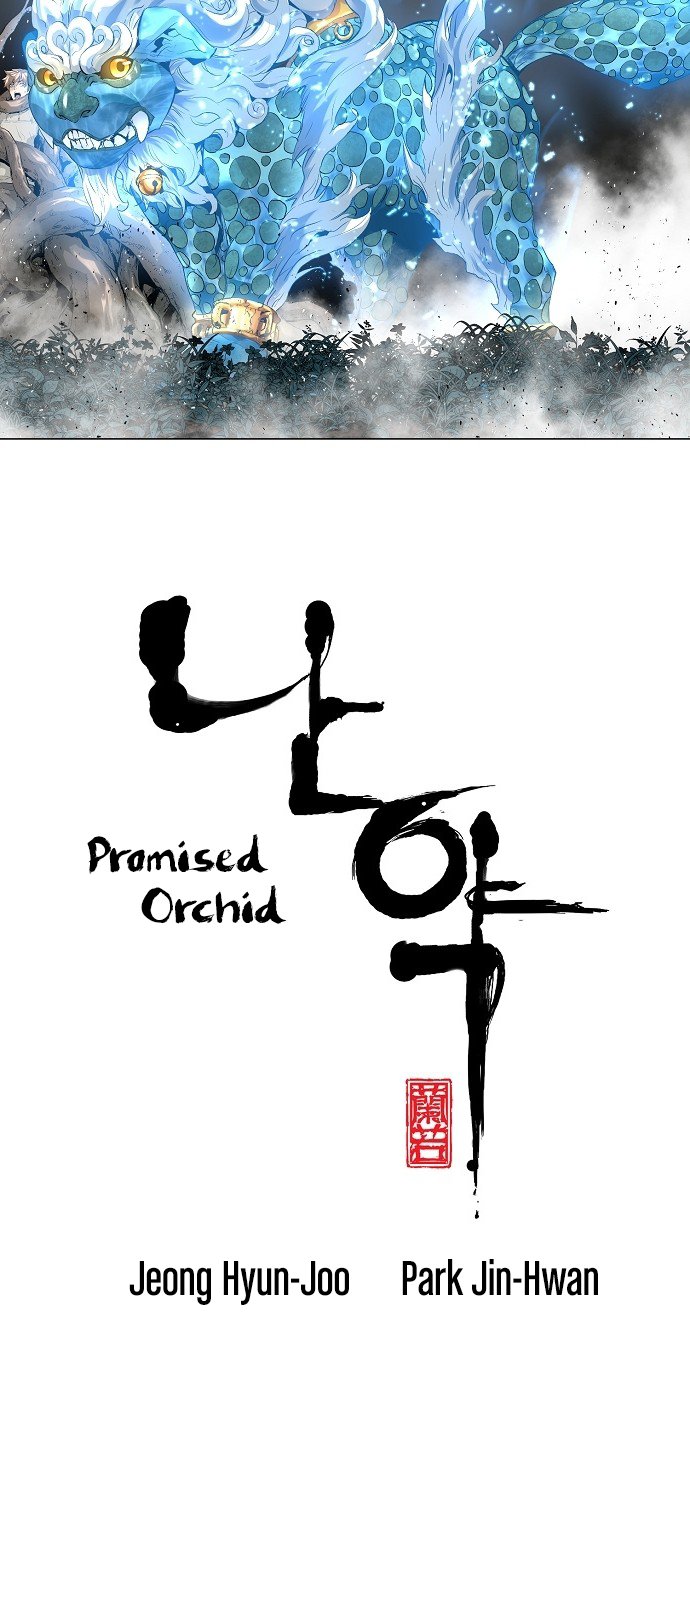 Promised Orchid image